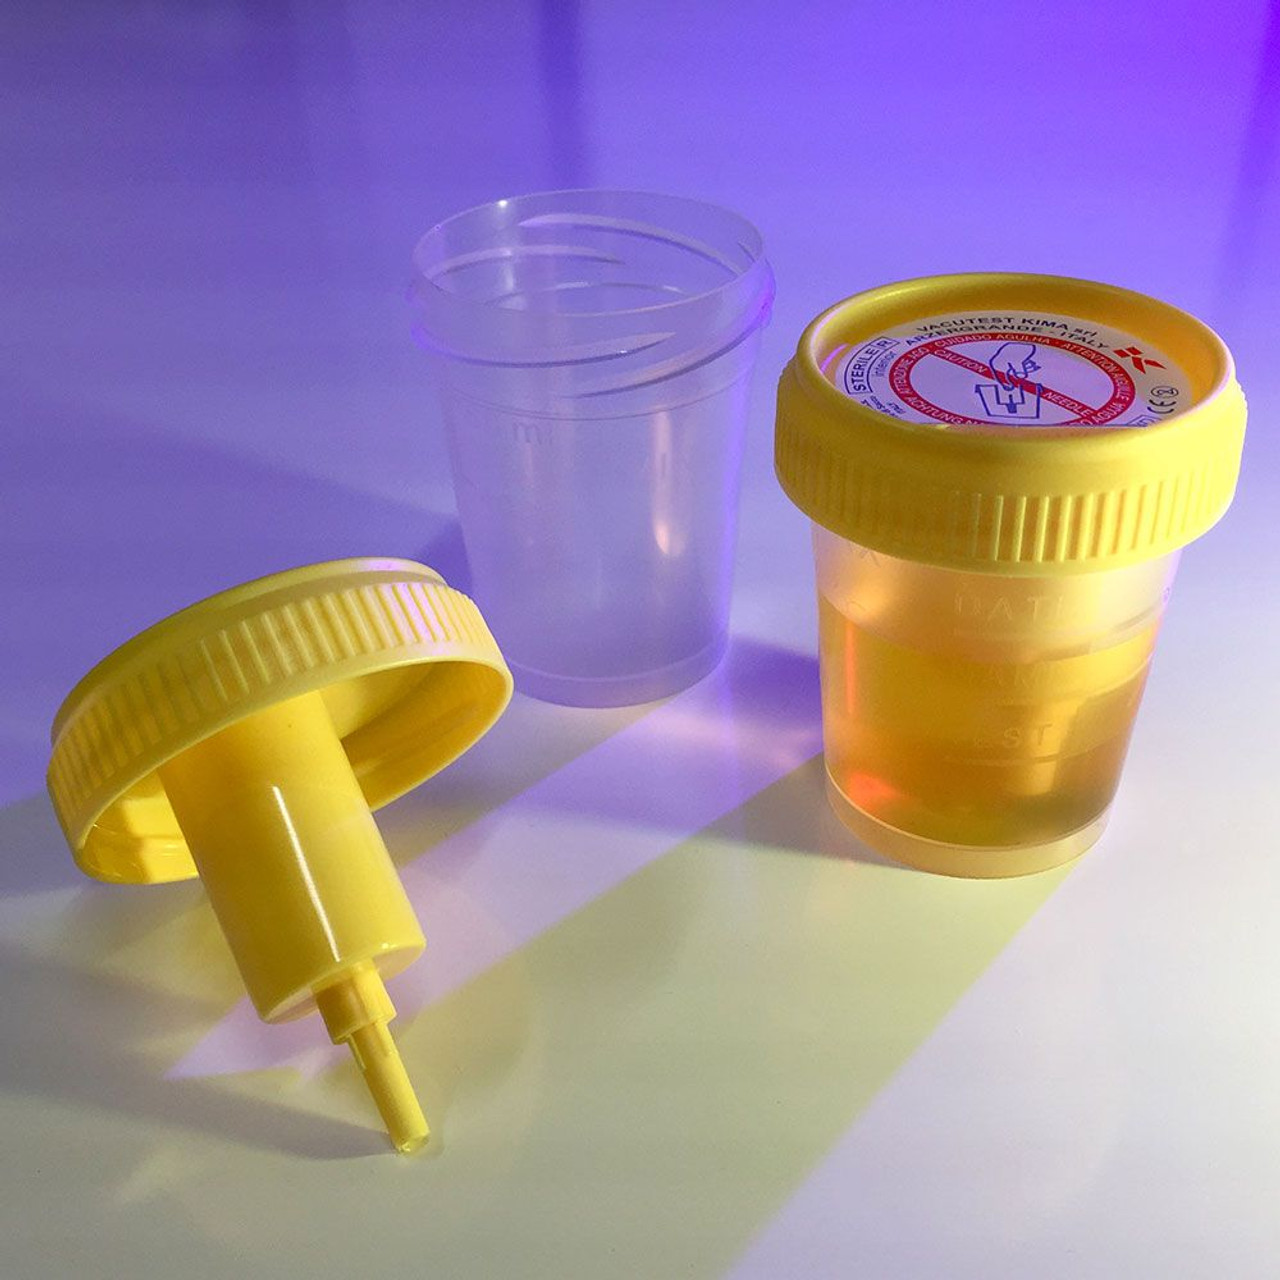 https://cdn11.bigcommerce.com/s-w9bdixgj/images/stencil/1280x1280/products/4840/10542/Urine_Collection_Cup_with_Integrated_Transfer_Device_2oz_STERILE_Individually_Wrapped__50794.1644955796.jpg?c=2